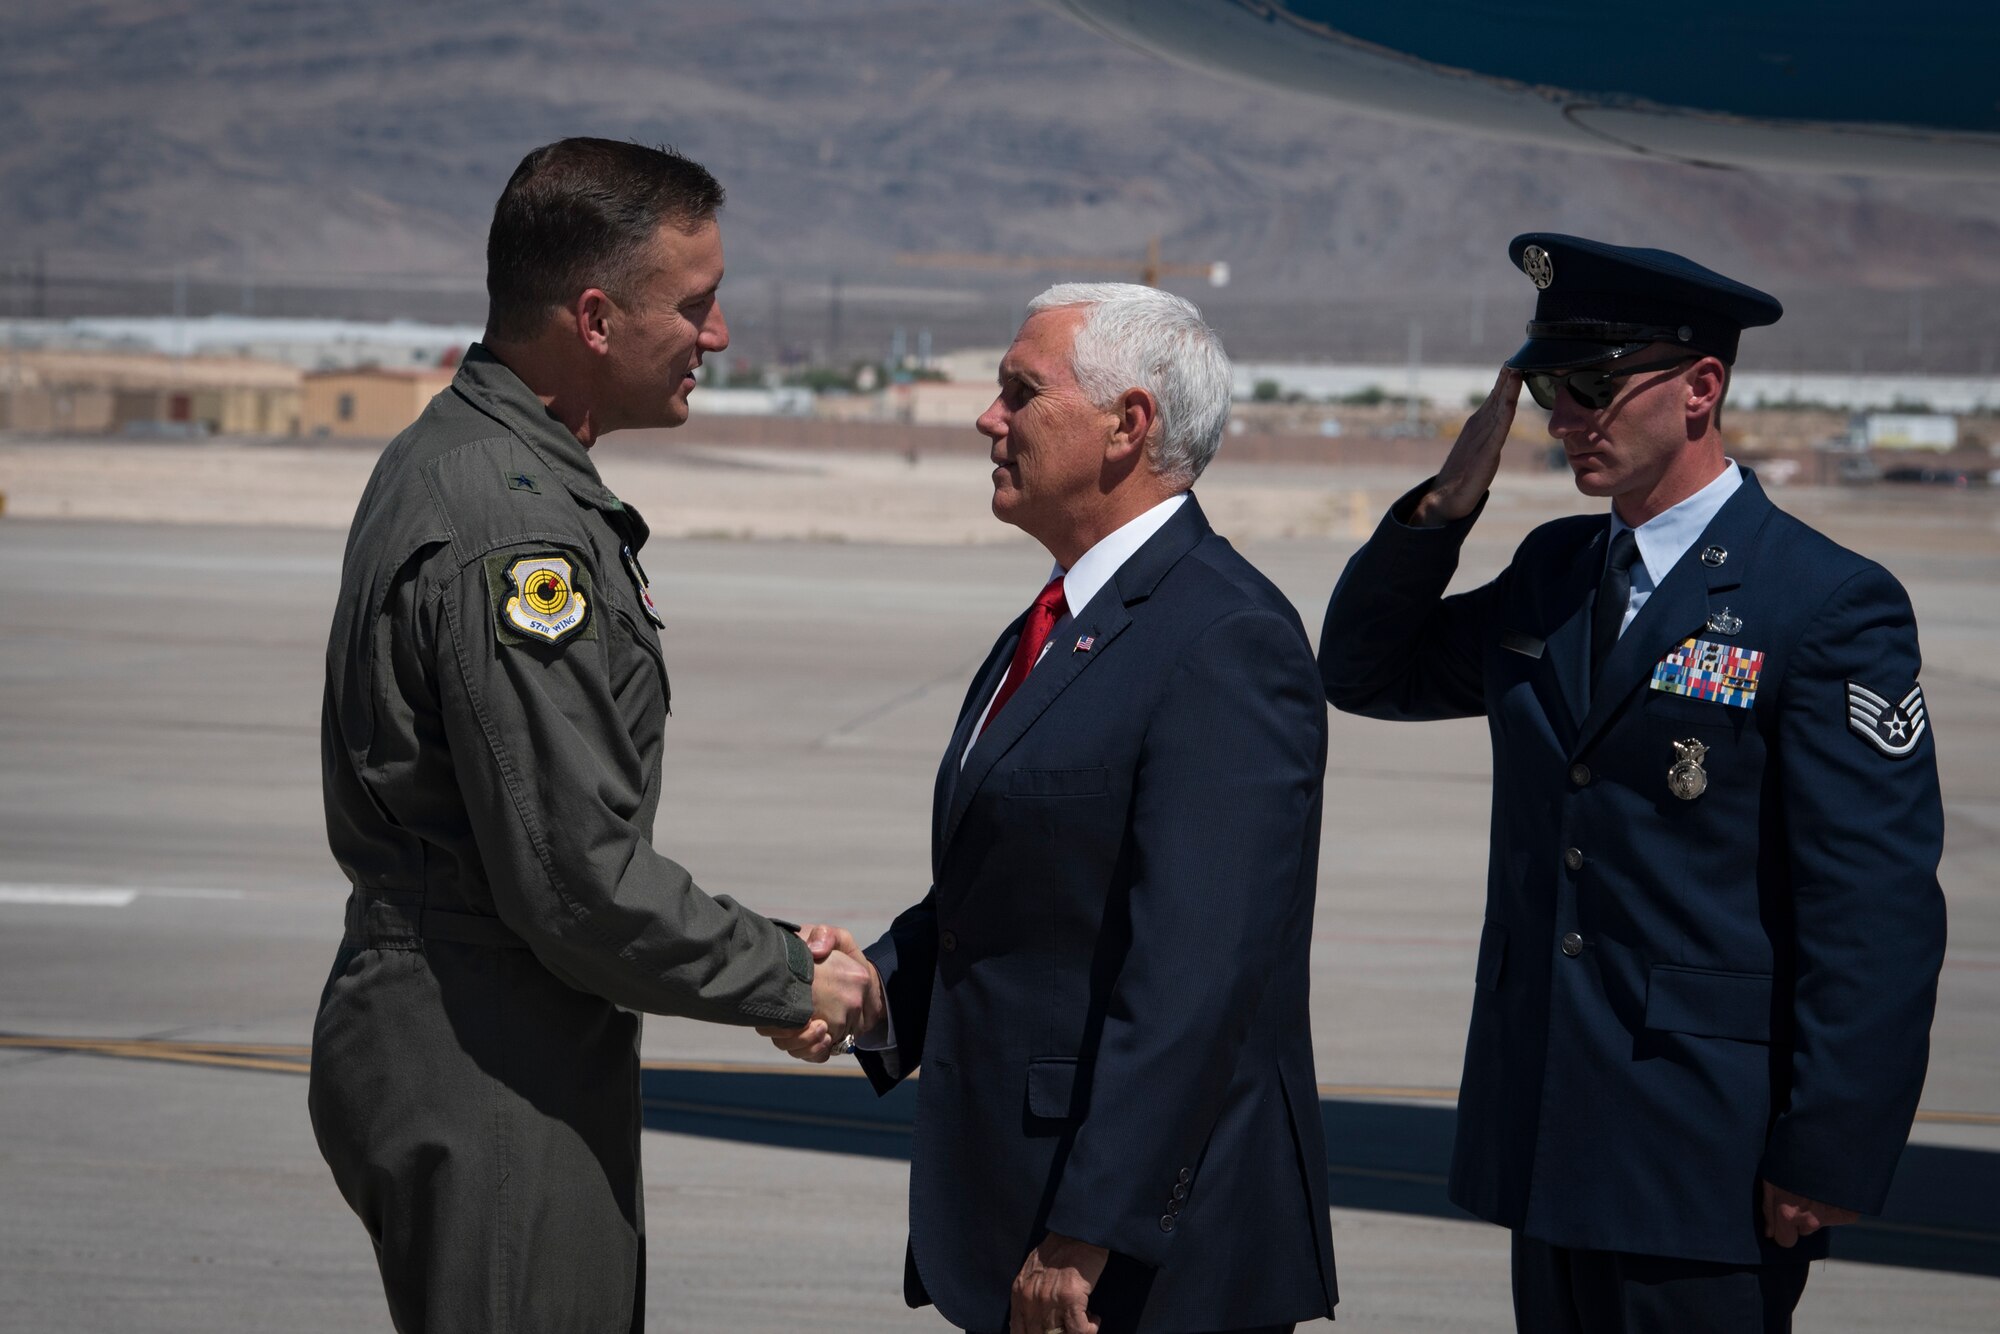 Vice President Mike Pence is greeted by Brig. Gen. Robert Novotny, 57th Wing commander, upon arriving at Nellis Air Force Base, Nevada, Sept. 7, 2018. Upon landing, Novotny and other base leaders escorted Pence to the flightline to converse with the Airmen. (U.S. Air Force photo by Airman 1st Class Andrew D. Sarver)